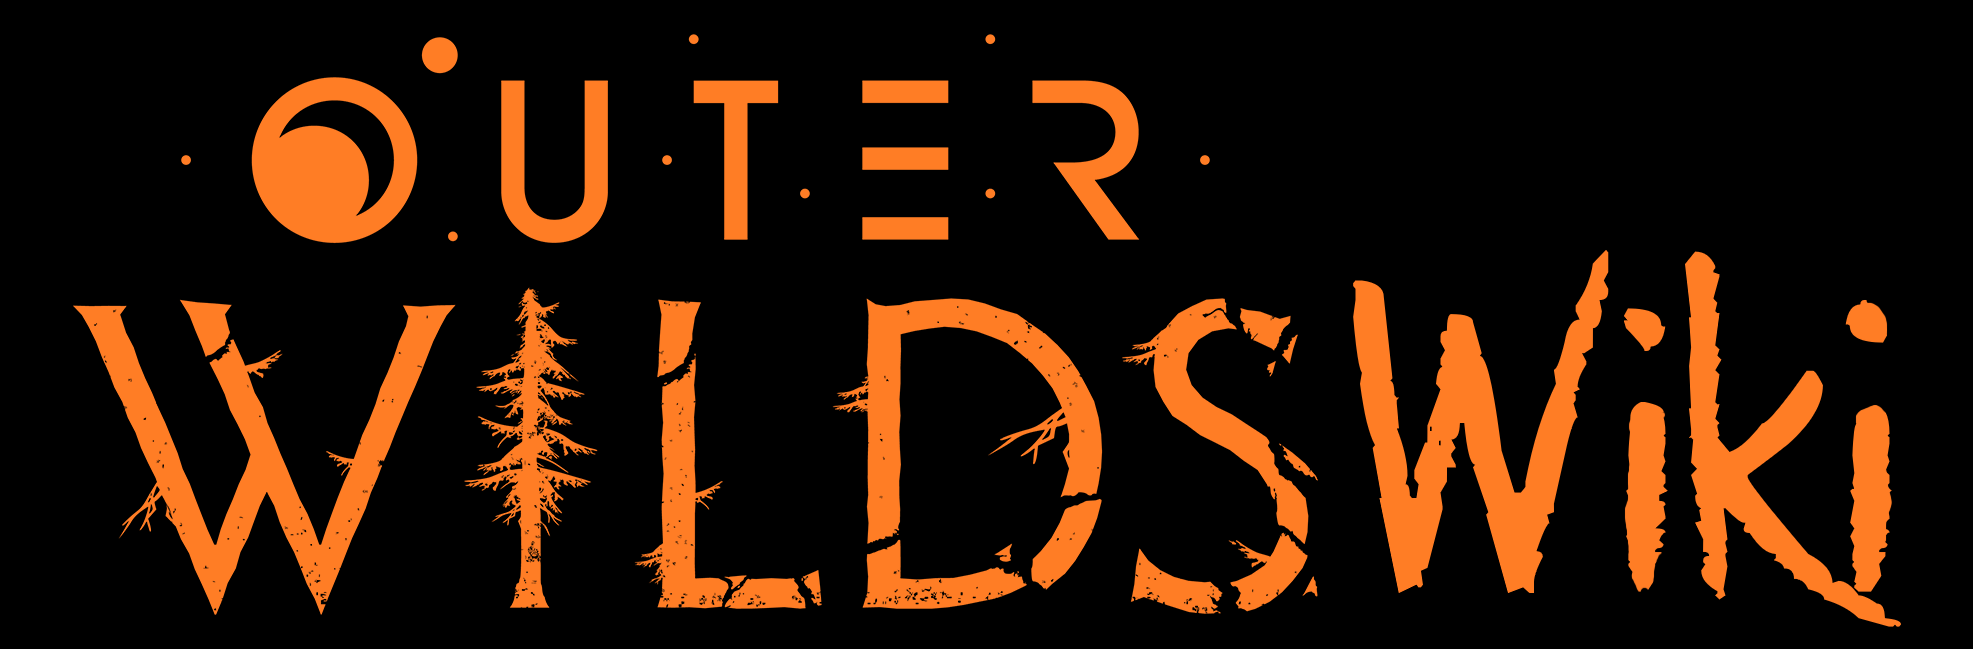 outer wilds logo